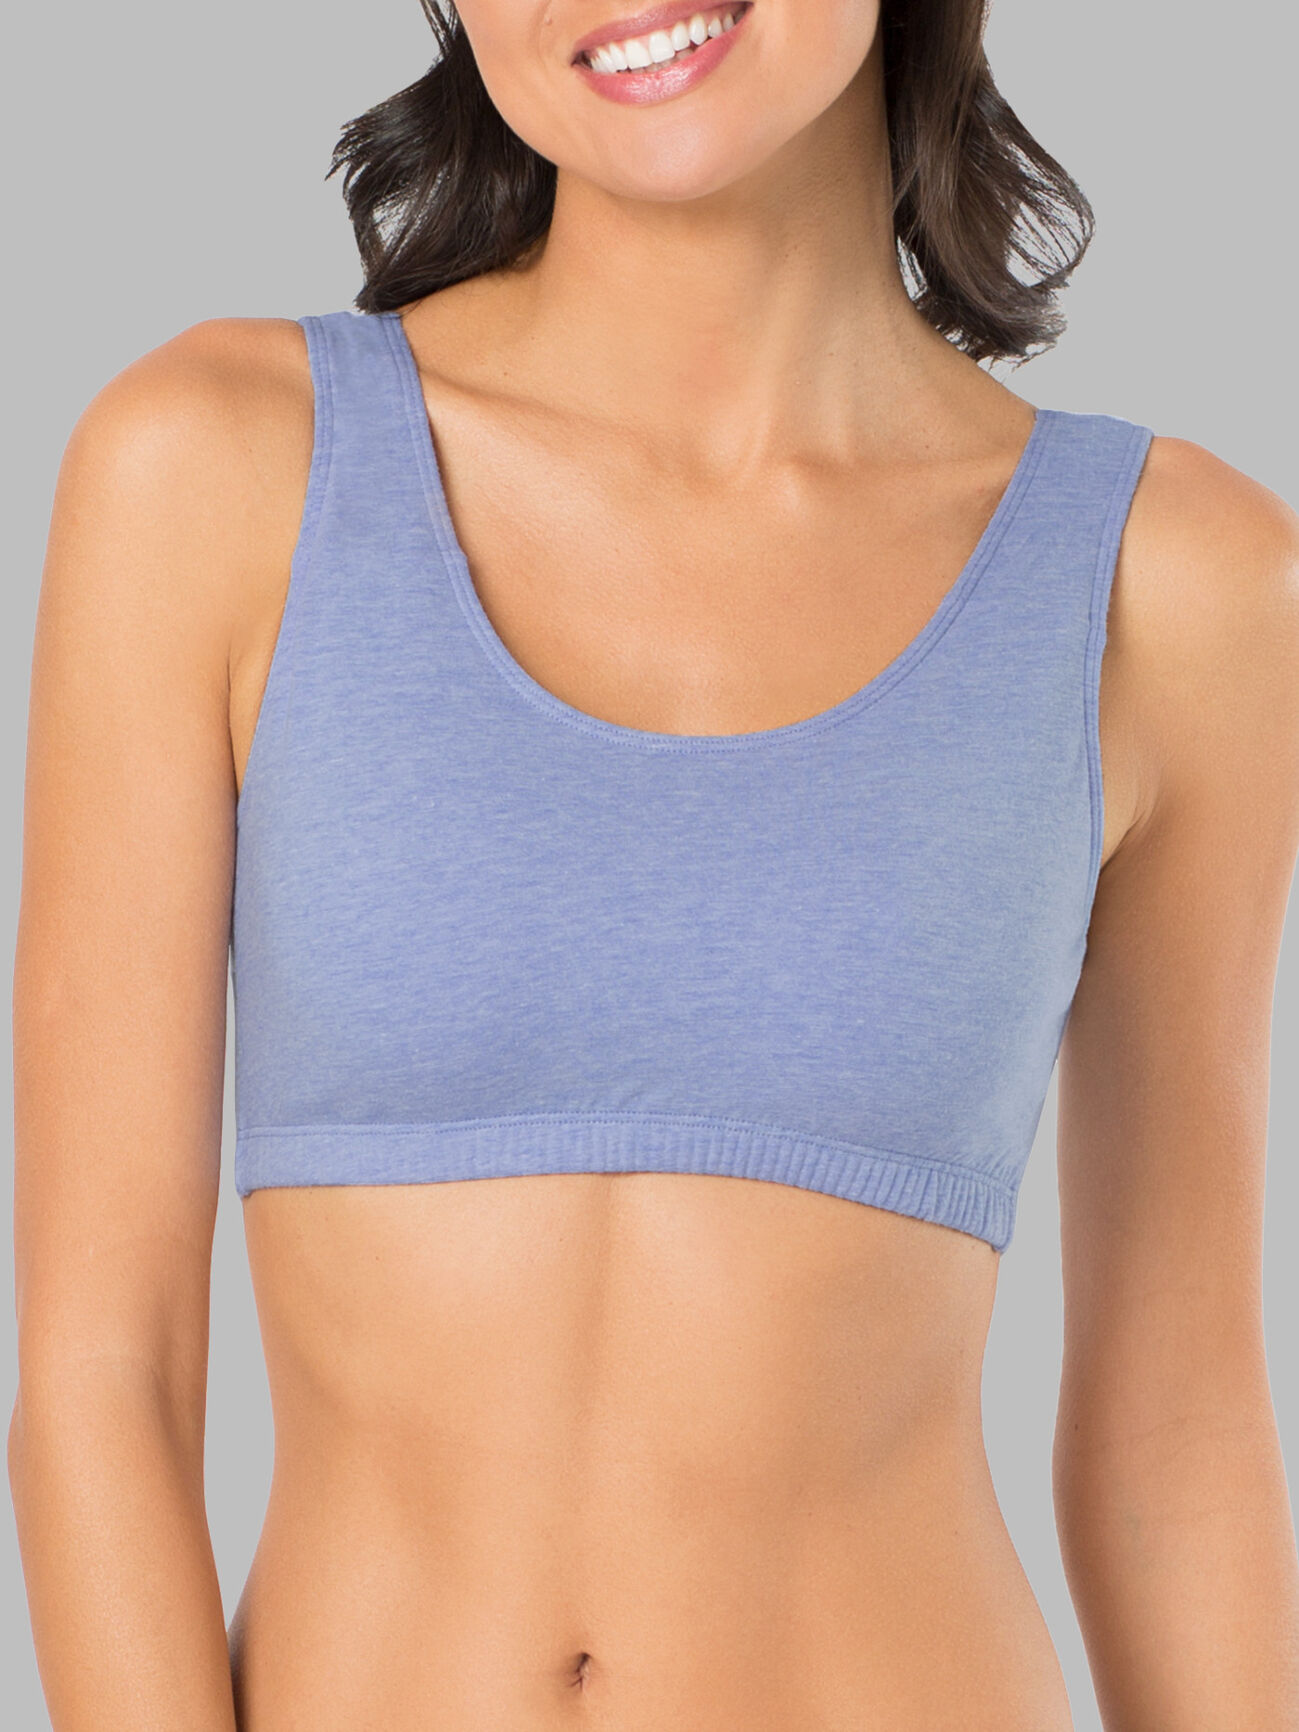 Sexy Comfy Women Sports Bra Pack oF 1 Any Multicolor